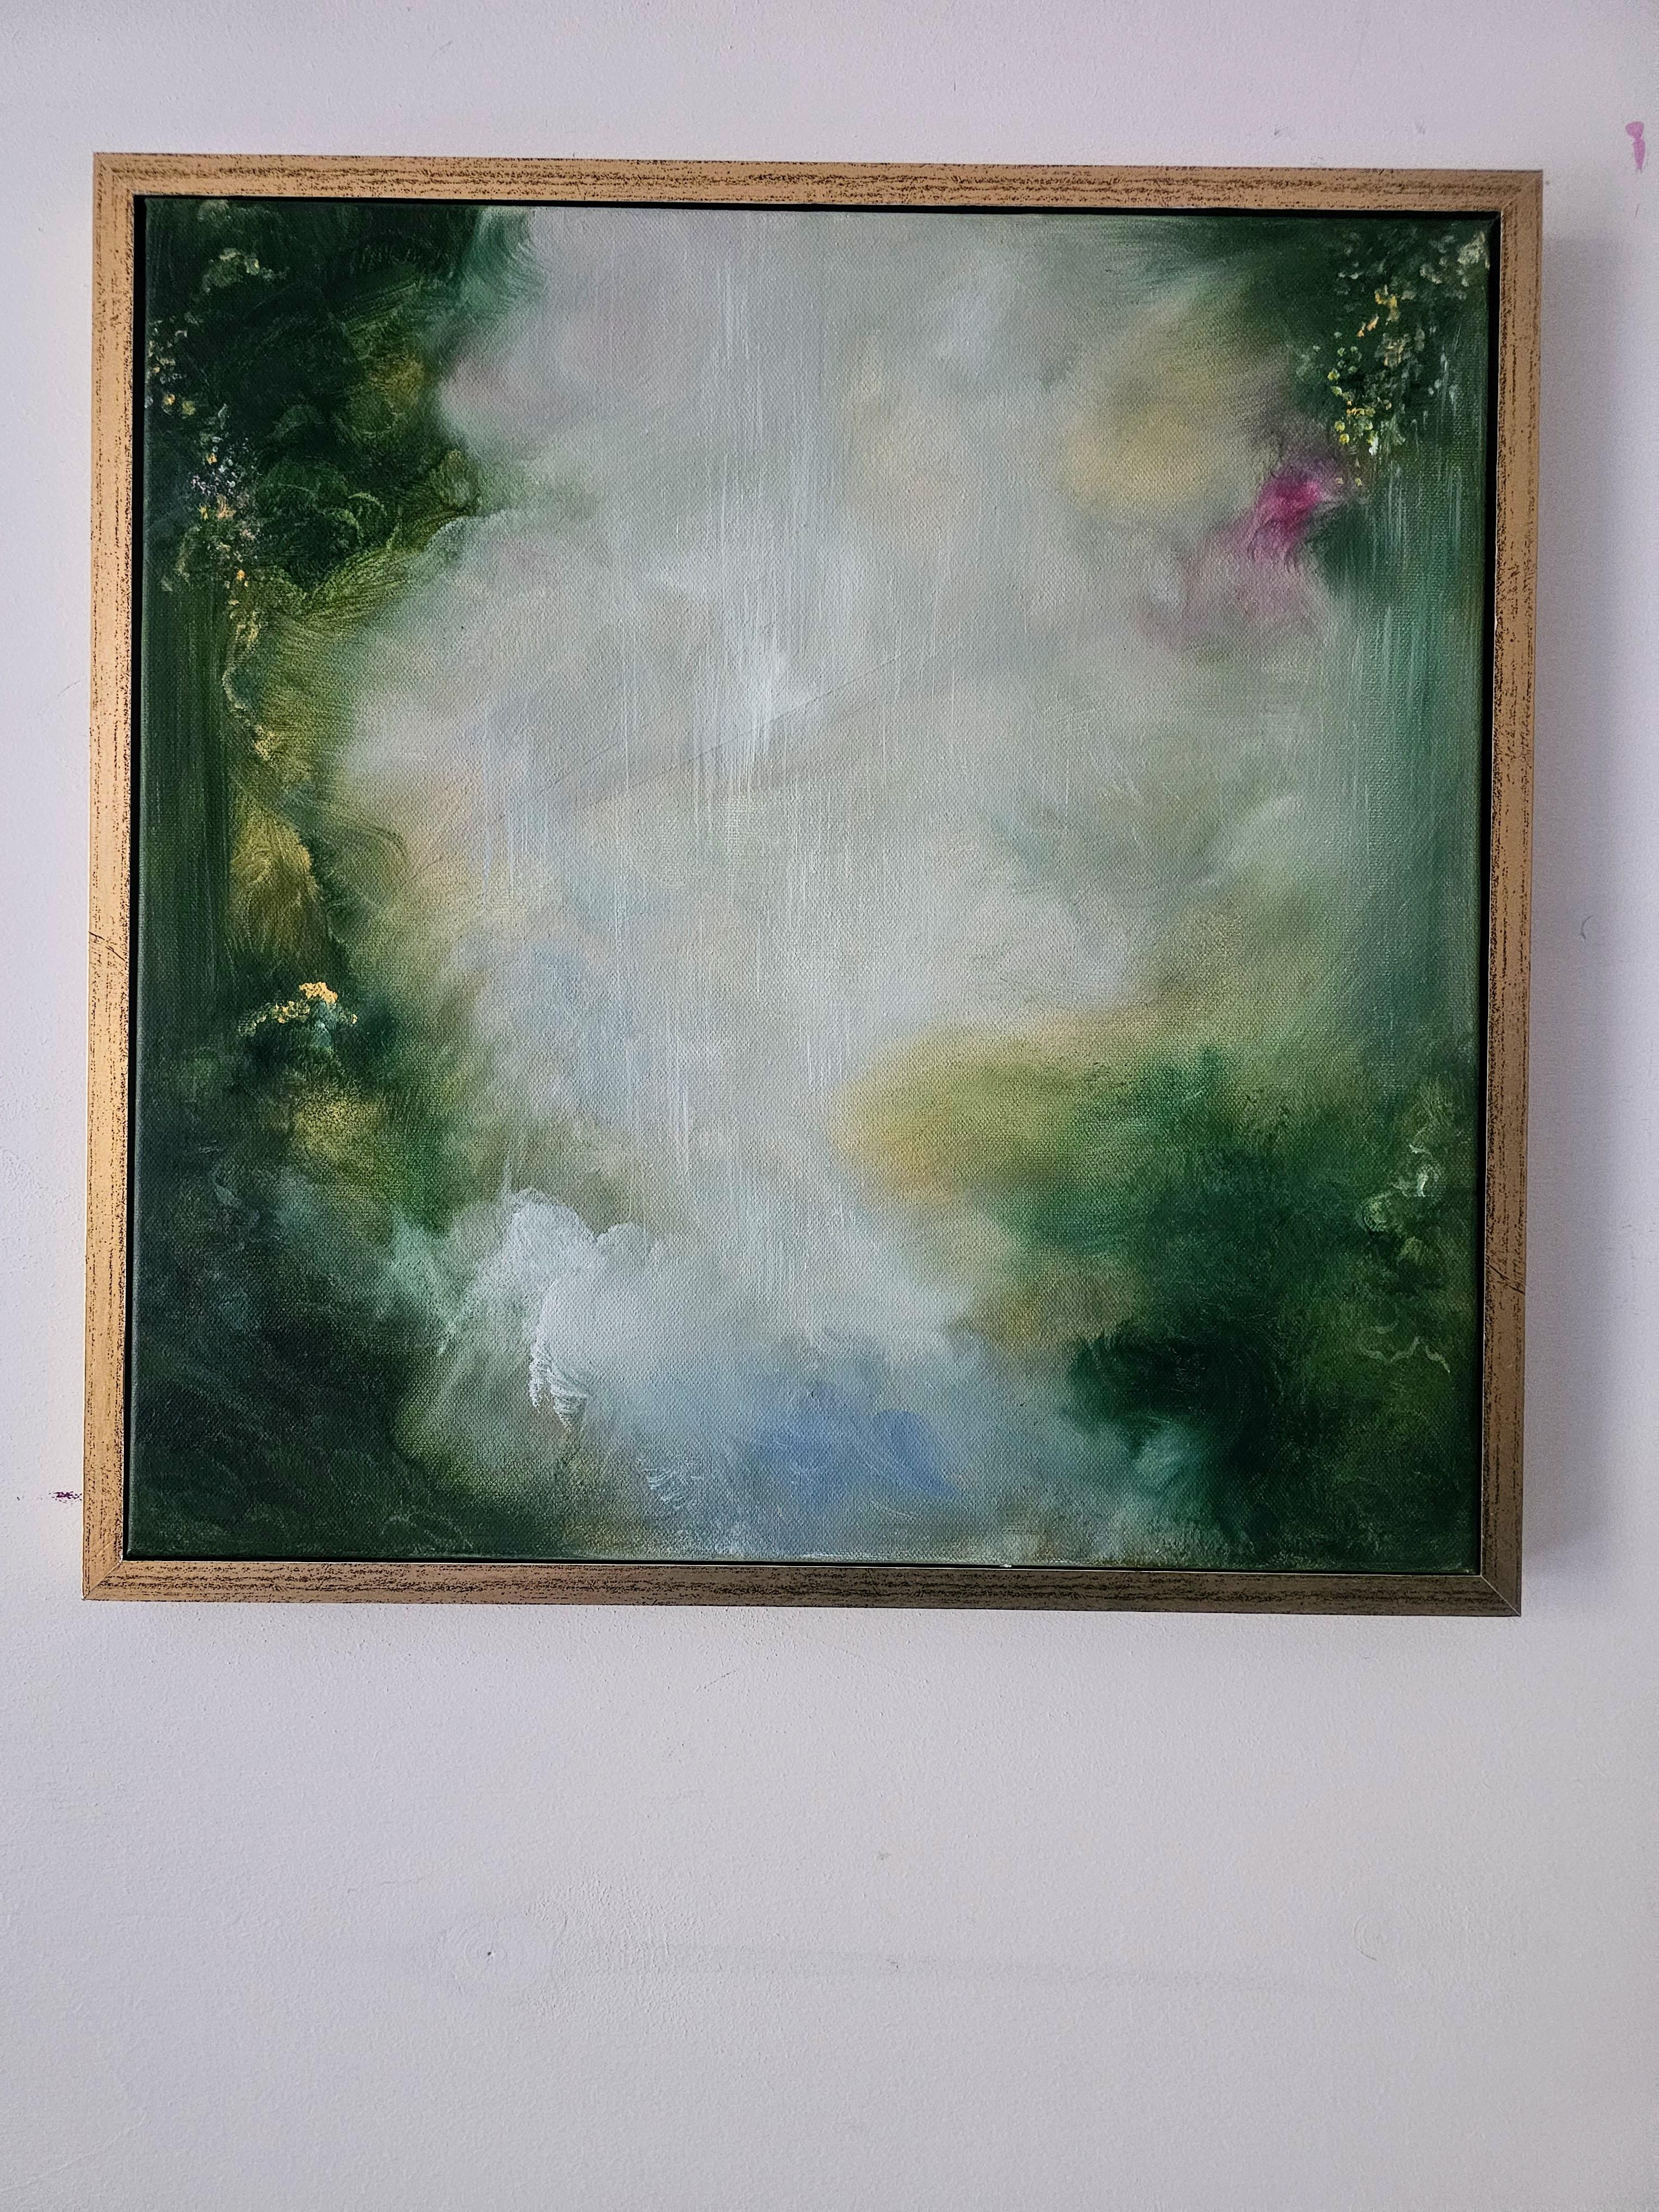 Enchanted - Framed abstract green nature painting - Painting by Jennifer L. Baker